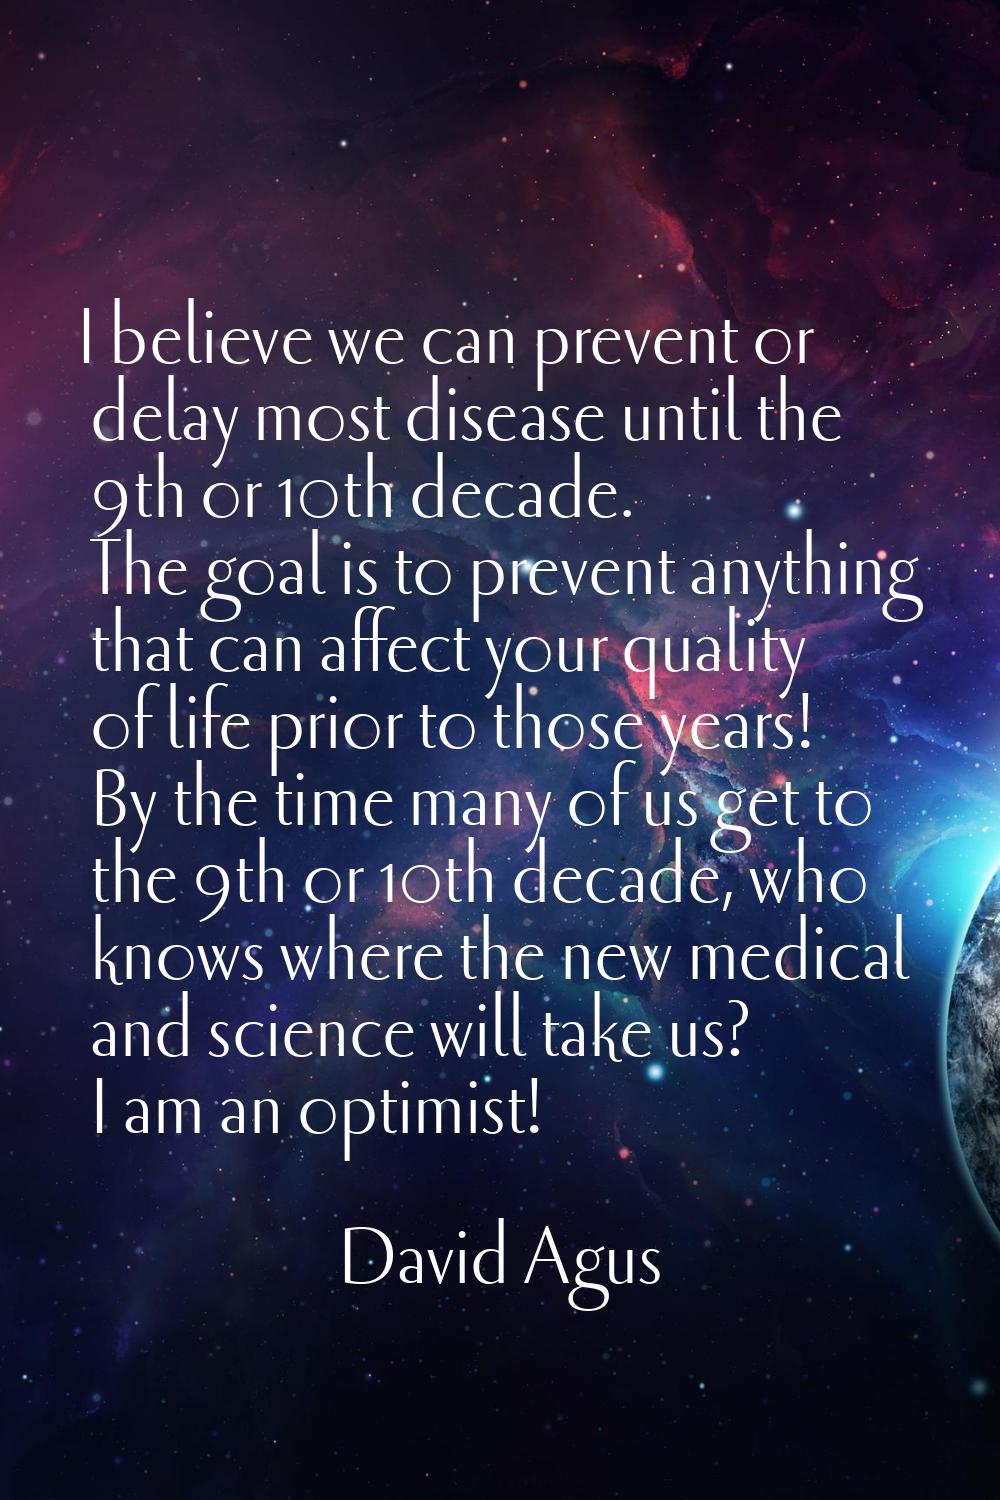 I believe we can prevent or delay most disease until the 9th or 10th decade. The goal is to prevent